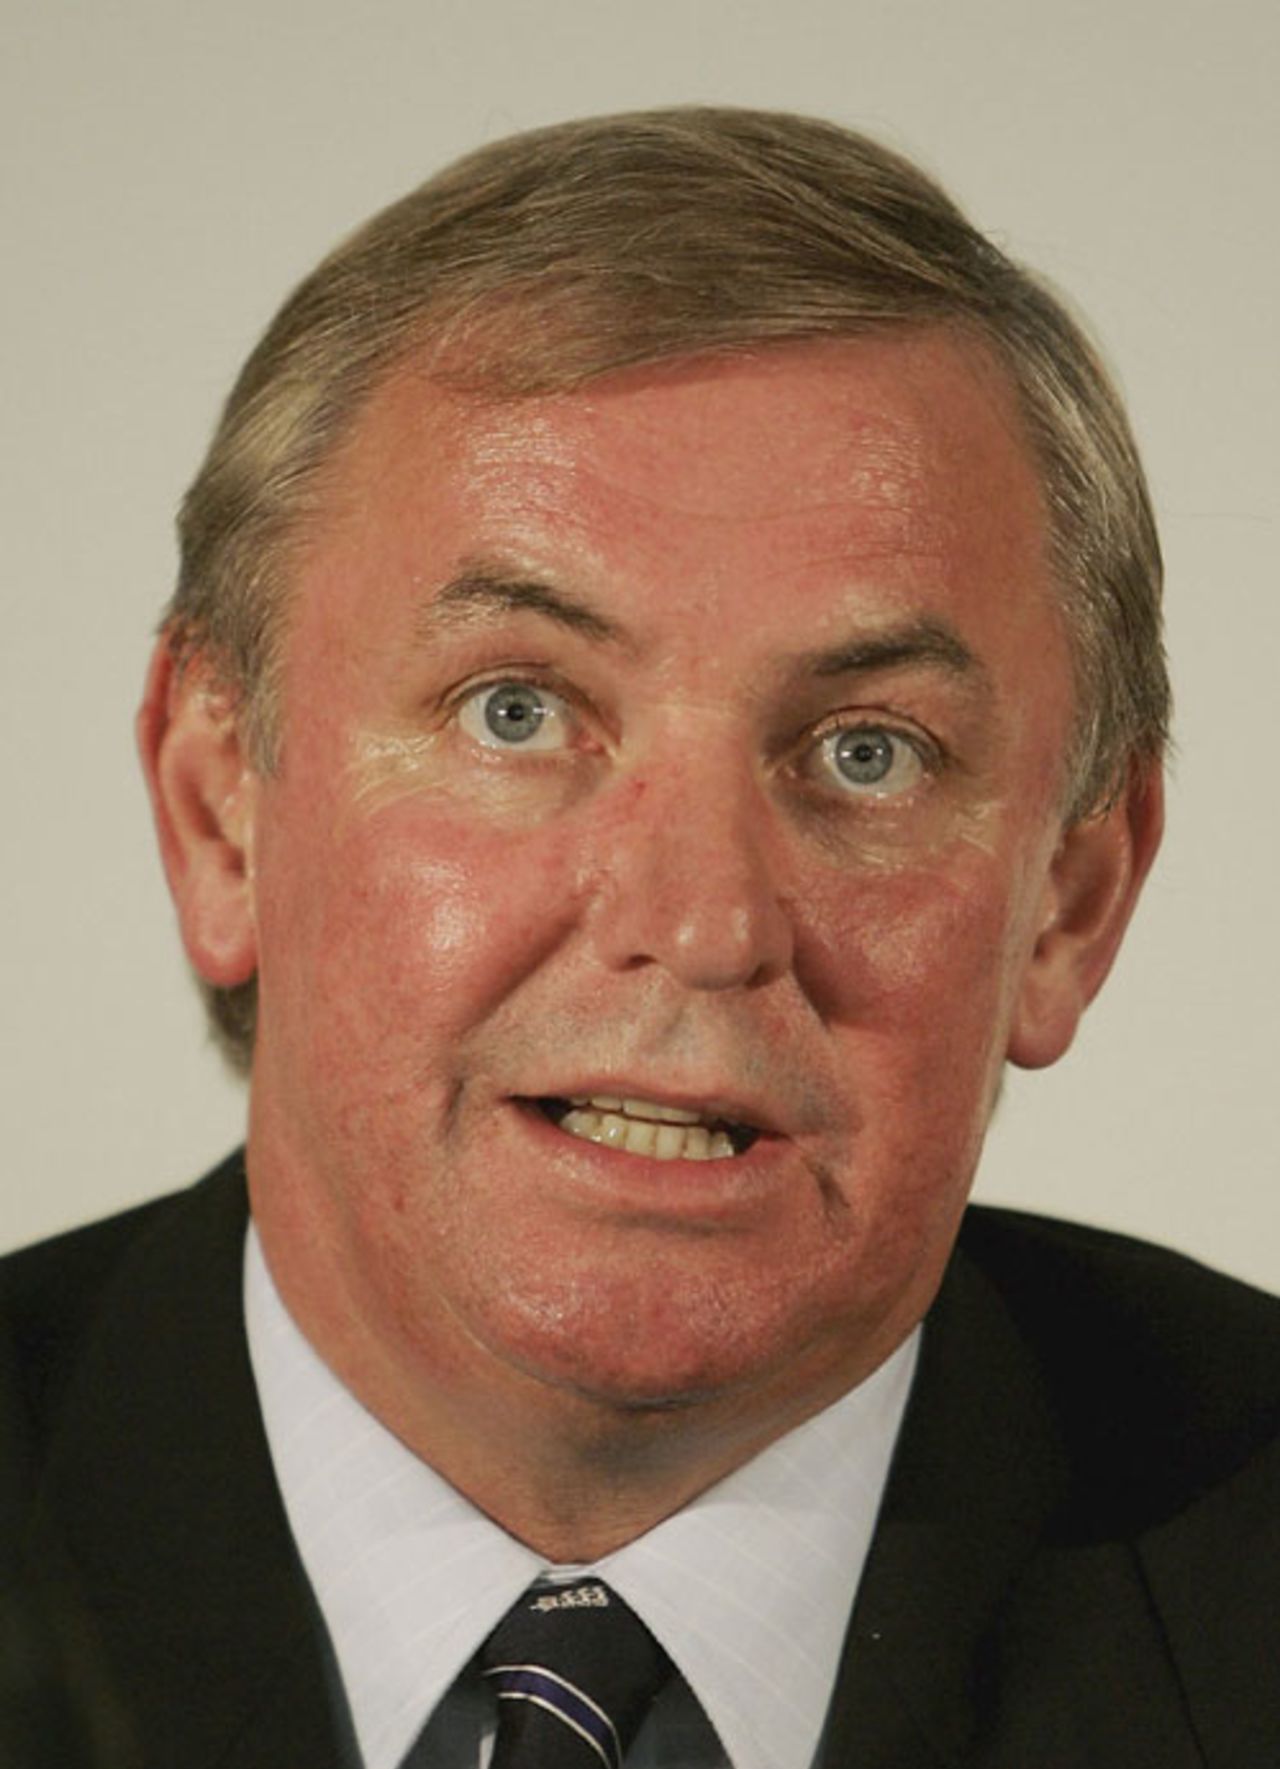 Chairman of selectors David Graveney looks glum during the announcement of the squad for the forthcoming Ashes and ICC Champions Trophy at the Oval on September 12, 2006.